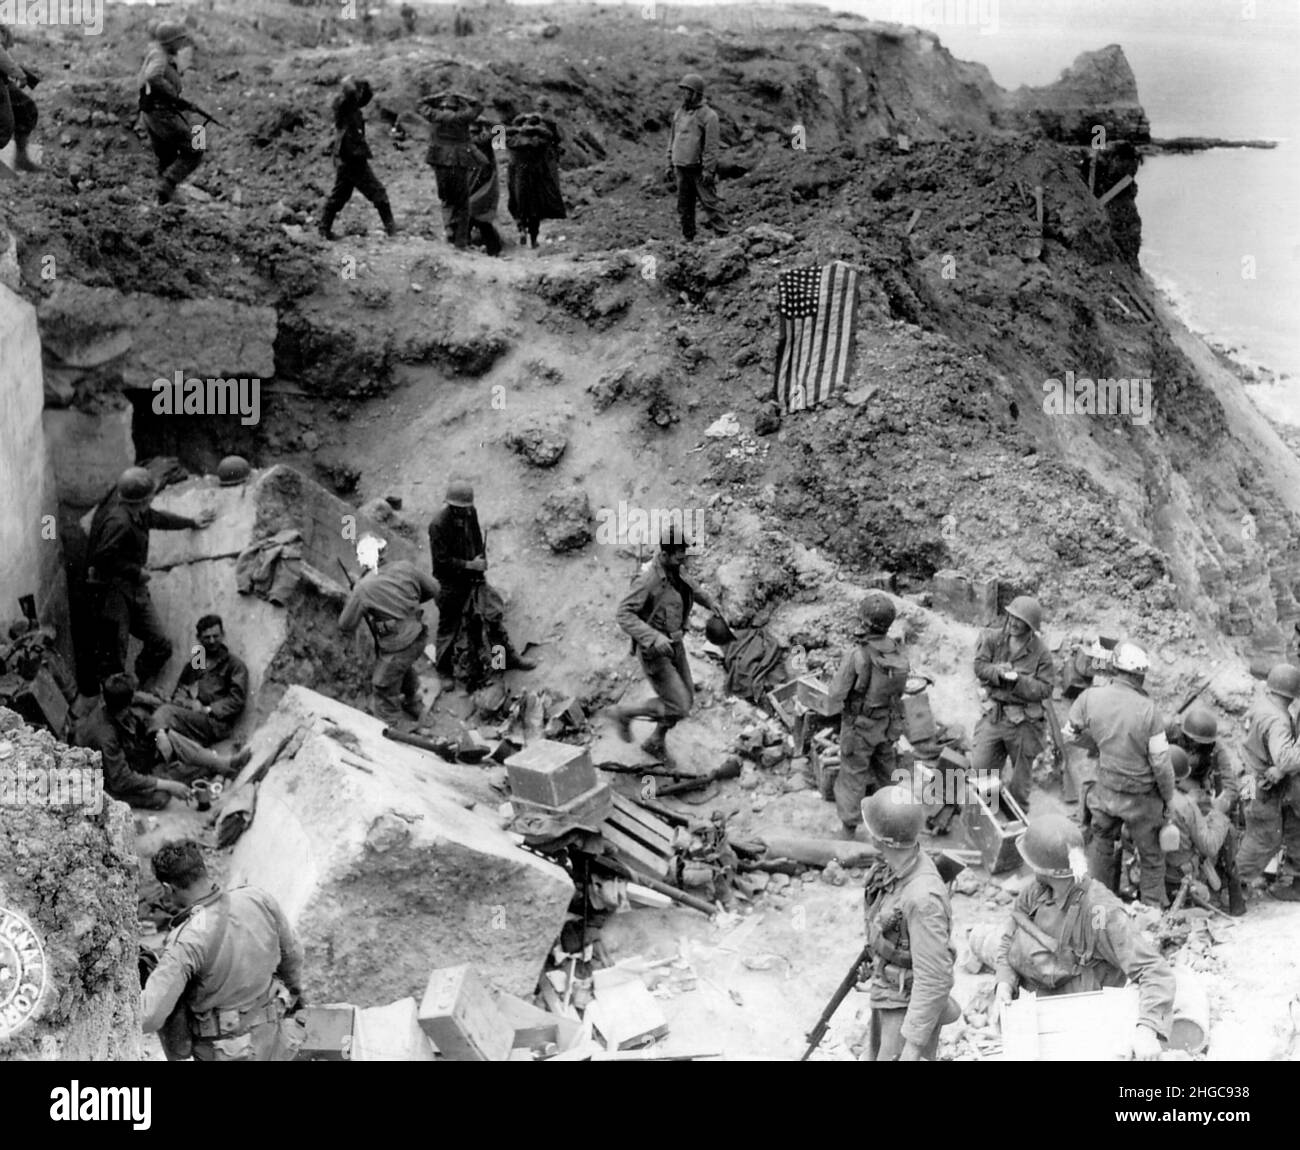 Two days after D-Day, after relief forces reached the Rangers on the cliffs of Pointe du Hoc. At the top of the image German soldiers can be seen surrendering. The American flag is put out to prevent friendly fire. Stock Photo